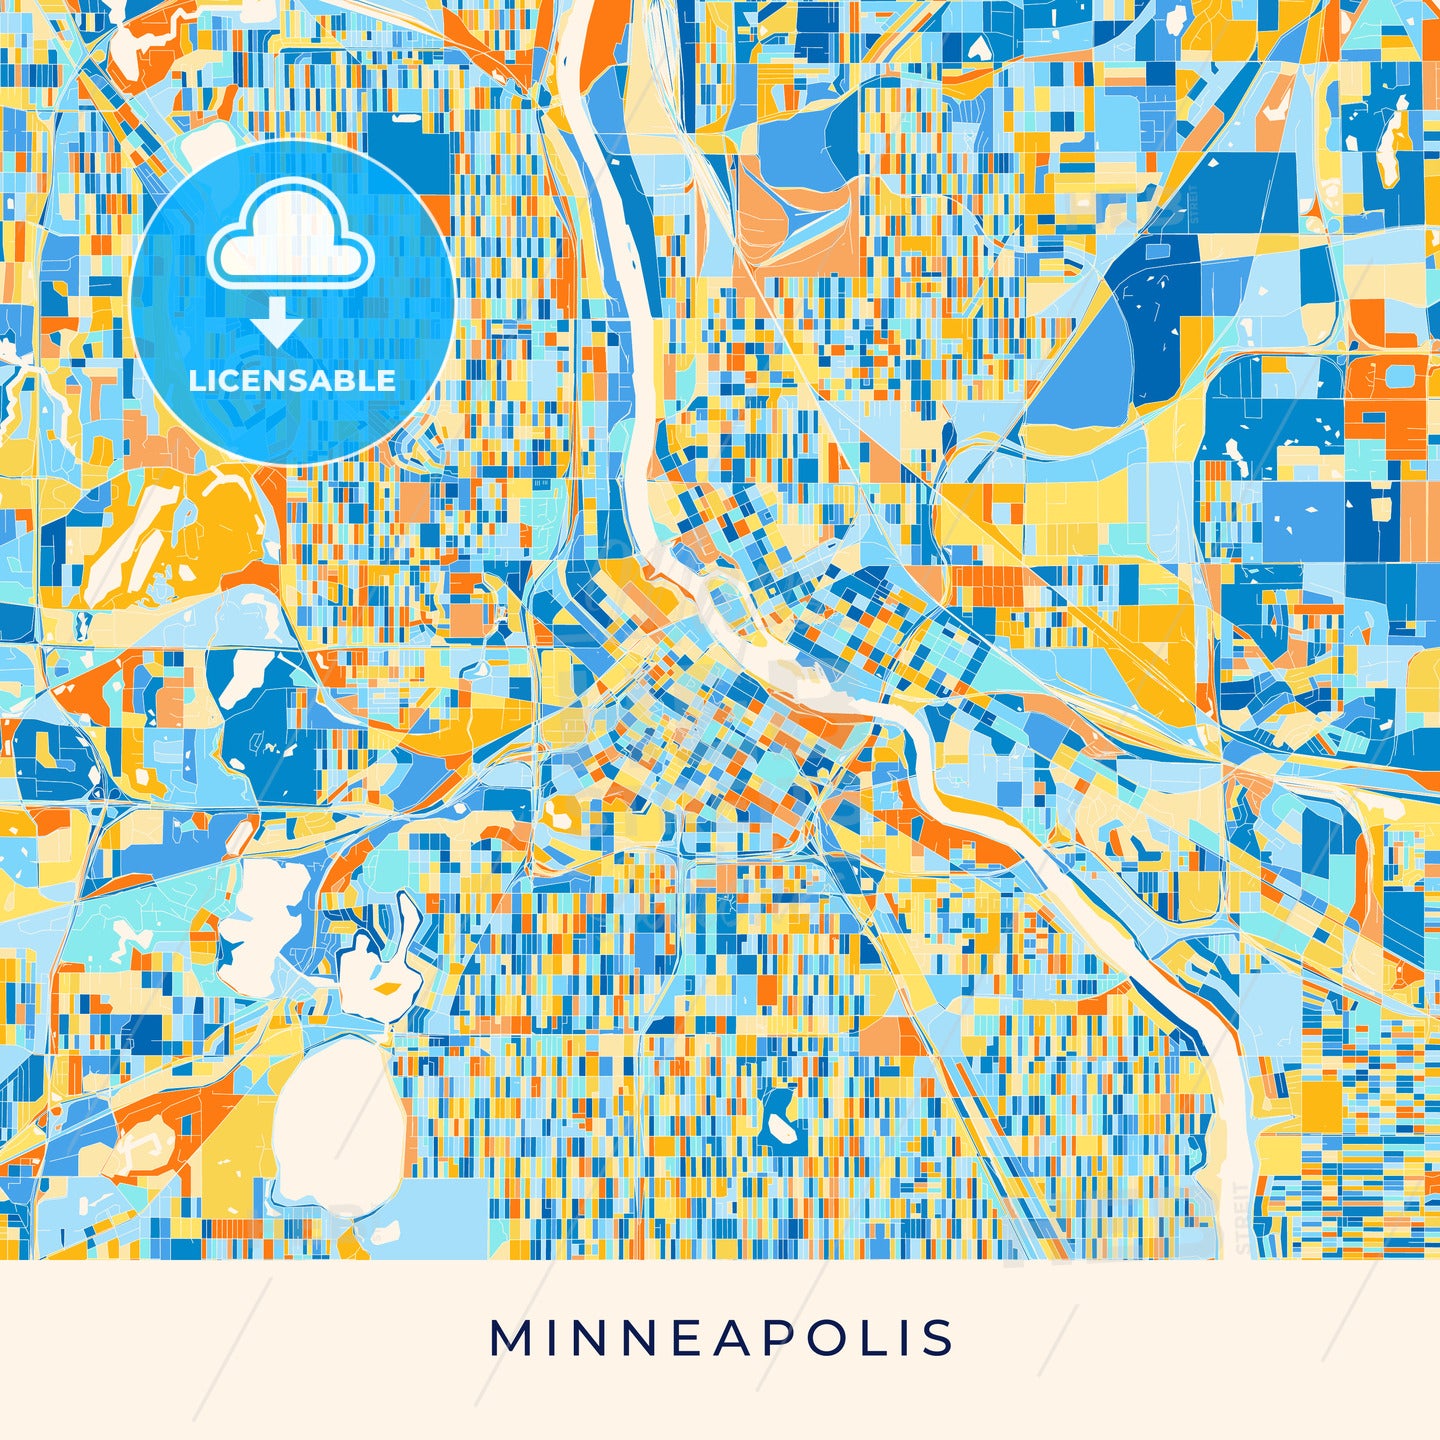 Minneapolis colorful map poster template